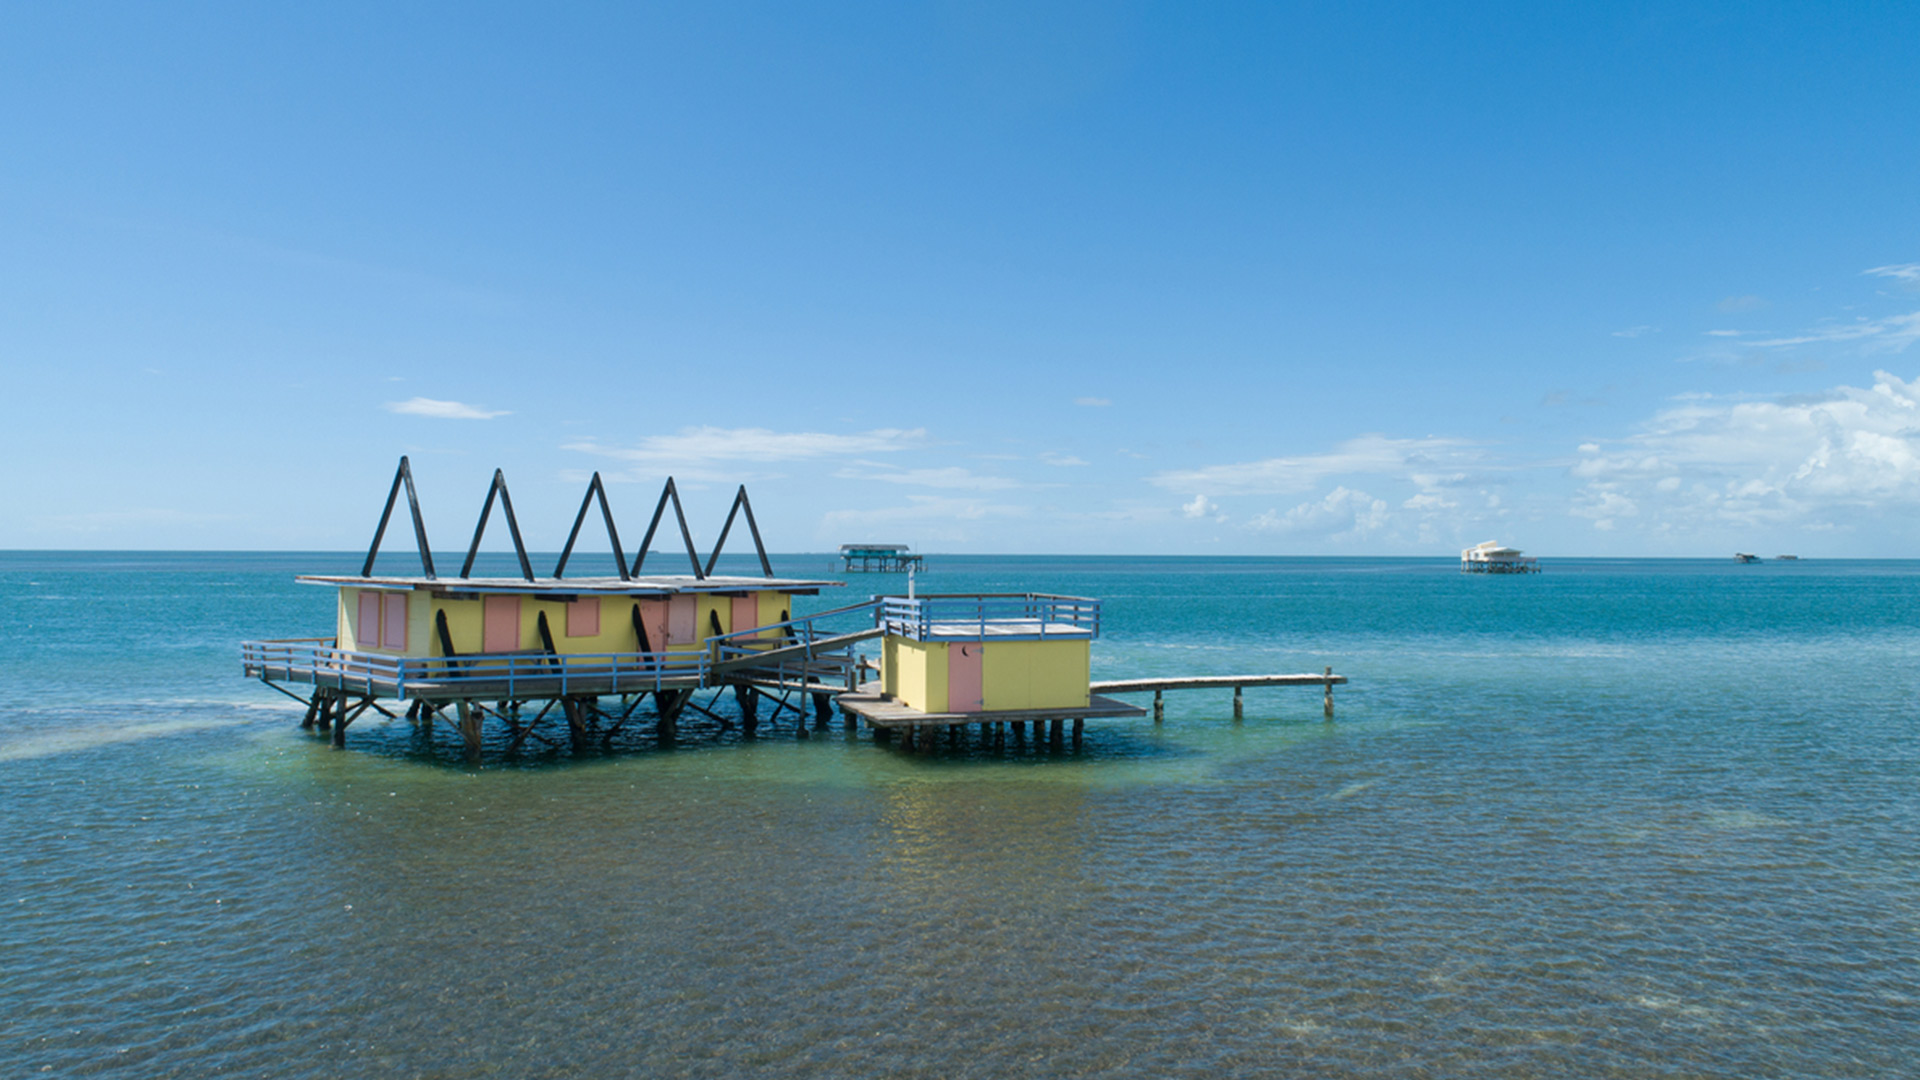 View of yellow wooden A-frame stiltsville house on the flats of biscayne bay.